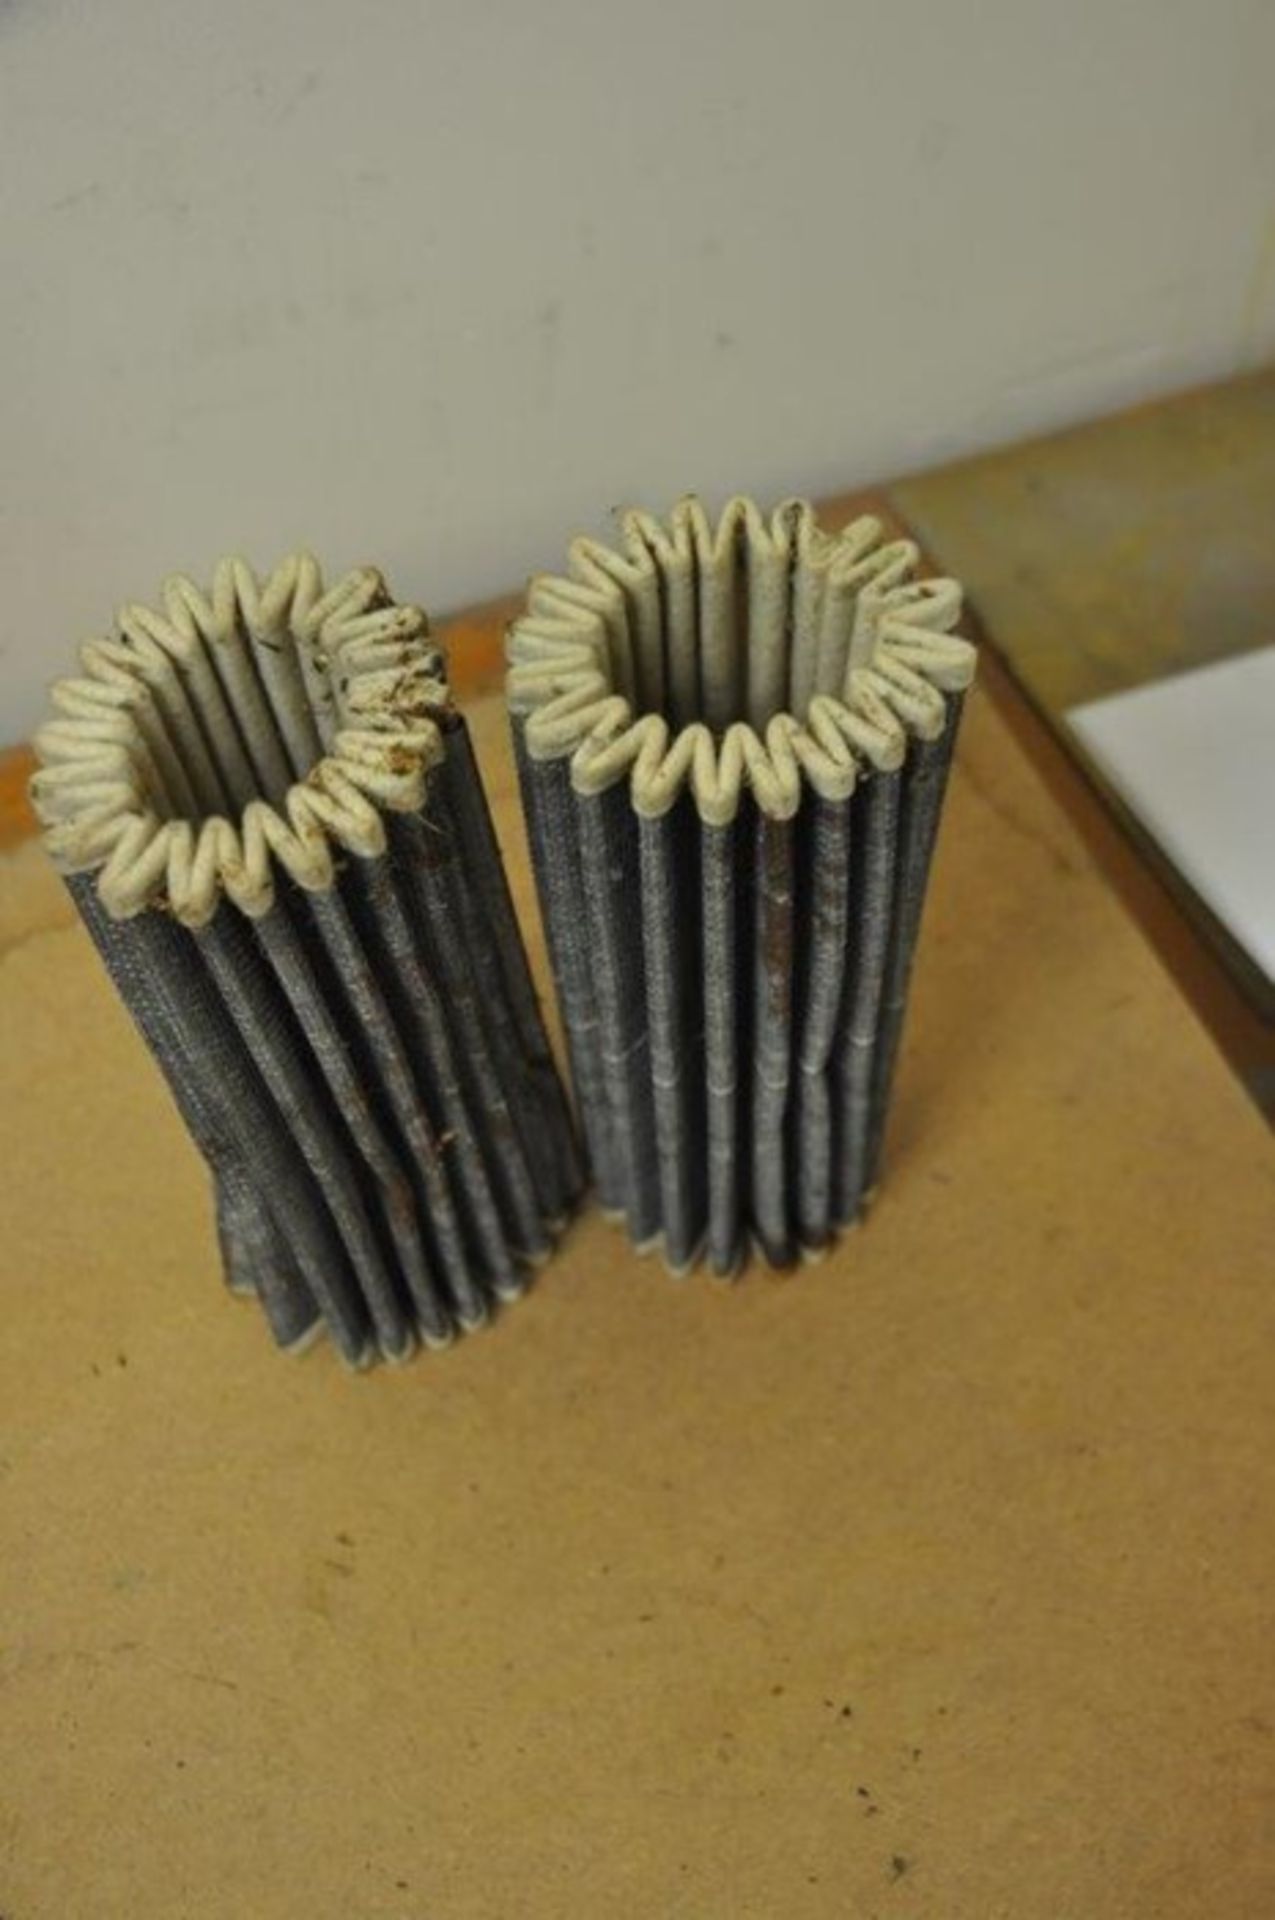 2 Mesh Wire Cloth Rolls - Image 2 of 2